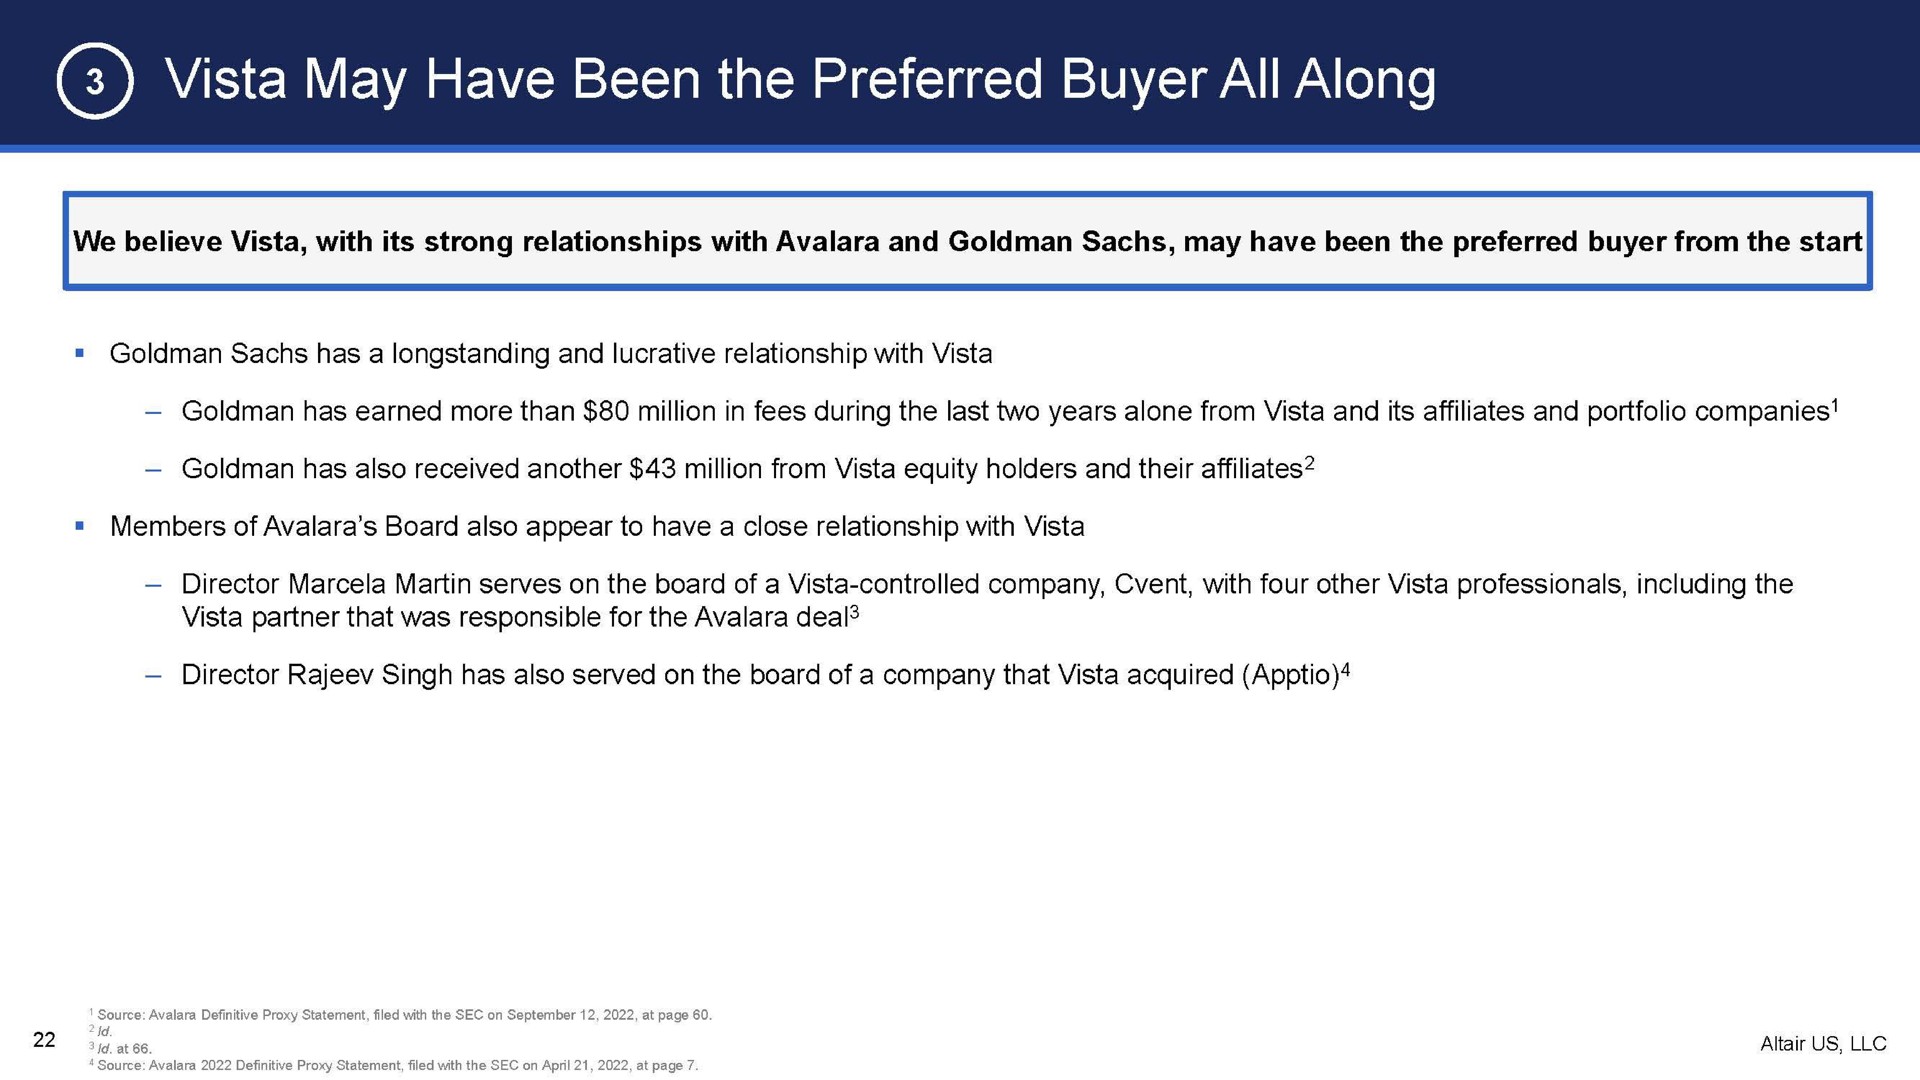 vista may have been the preferred buyer all along | Altair US LLC